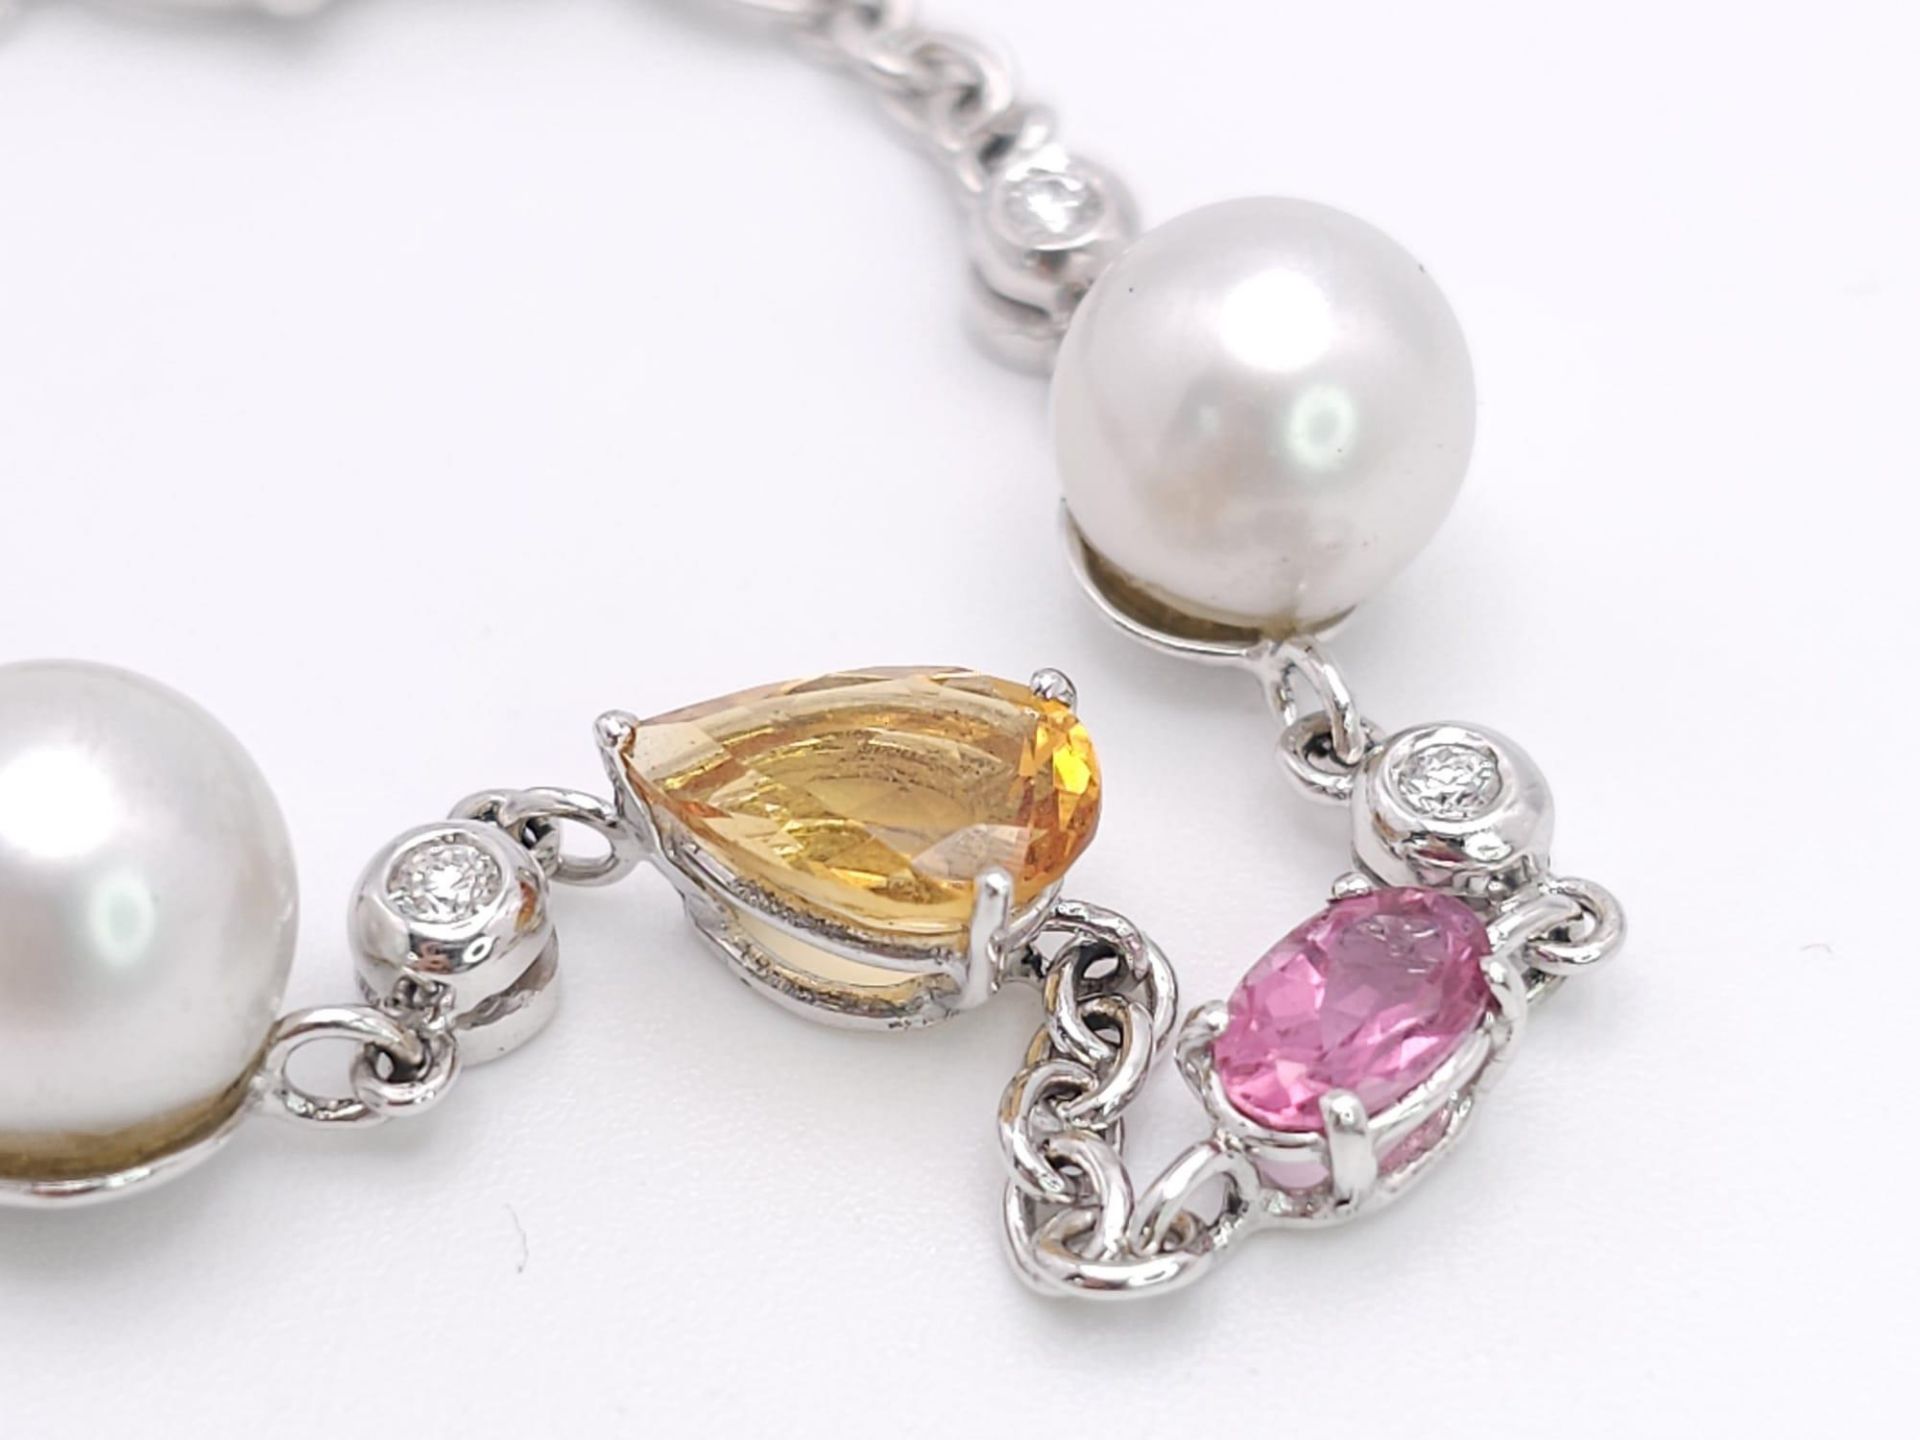 An 18 K white gold chain bracelet with a variety of gemstones (peridot, amethyst, citrine, etc) - Image 3 of 6